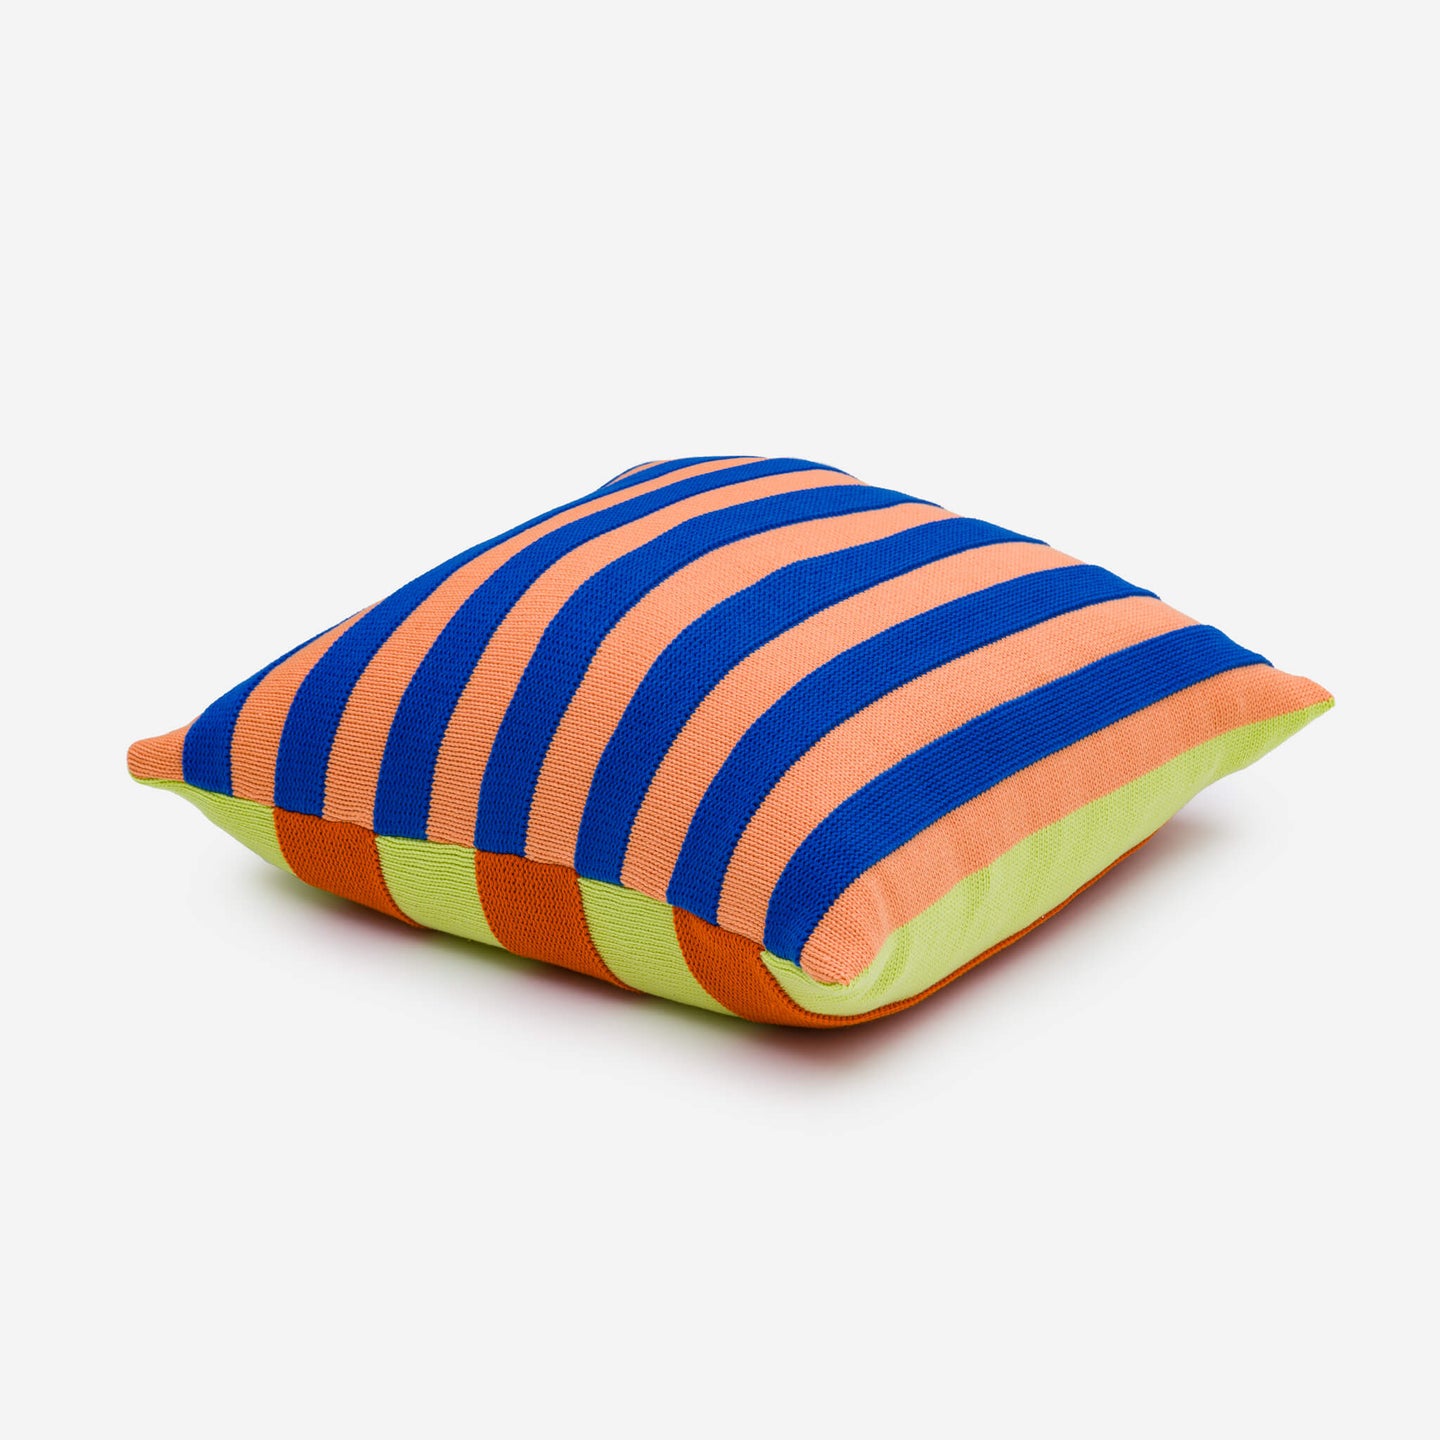 Super Stripe Raised Textured Pillow Cover Accent Colorful Yellow Blue